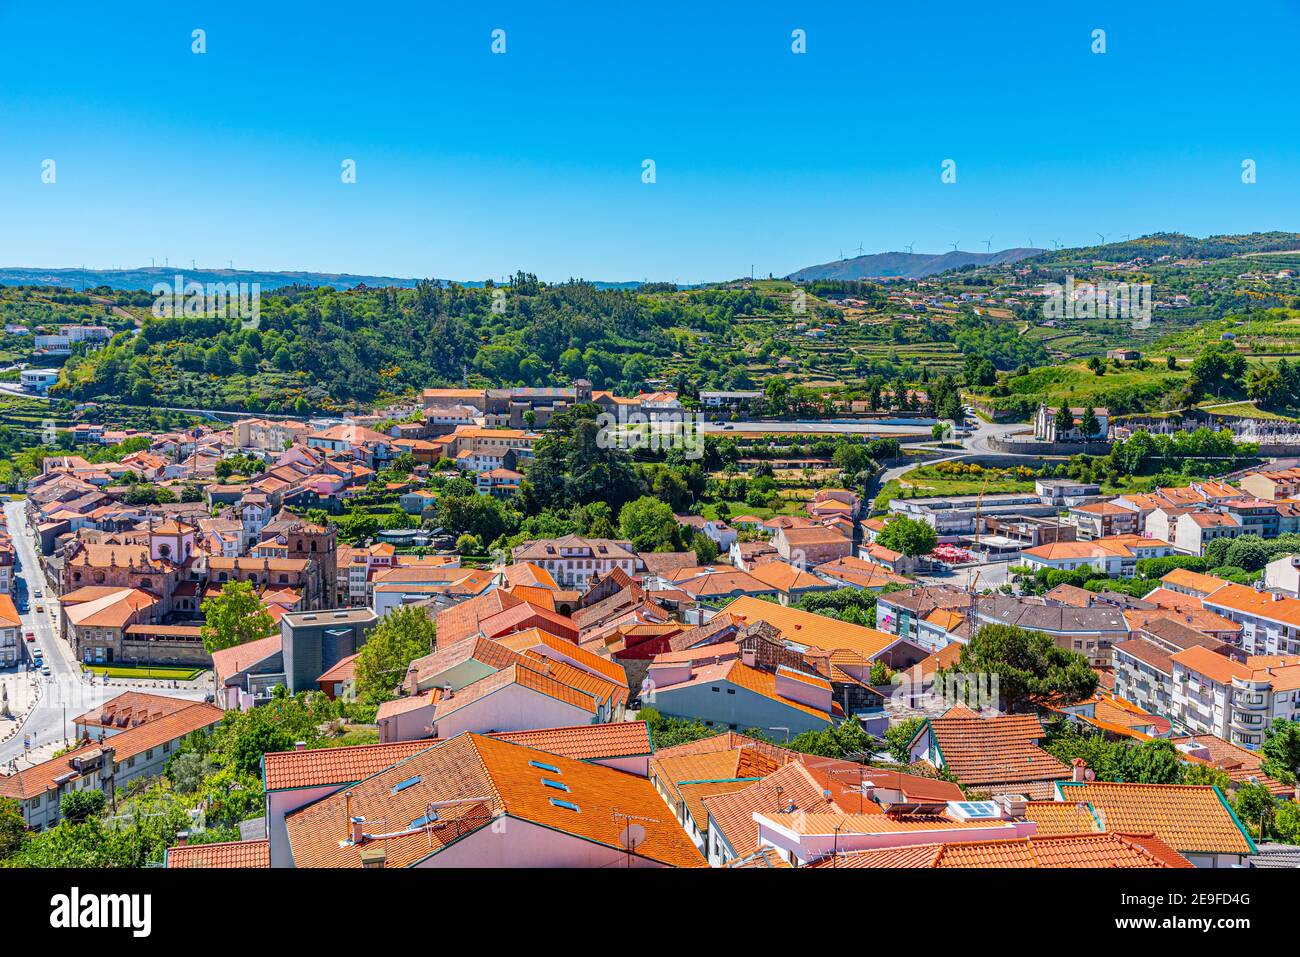 Aerial view of Lamego town in Portugal Stock Photo